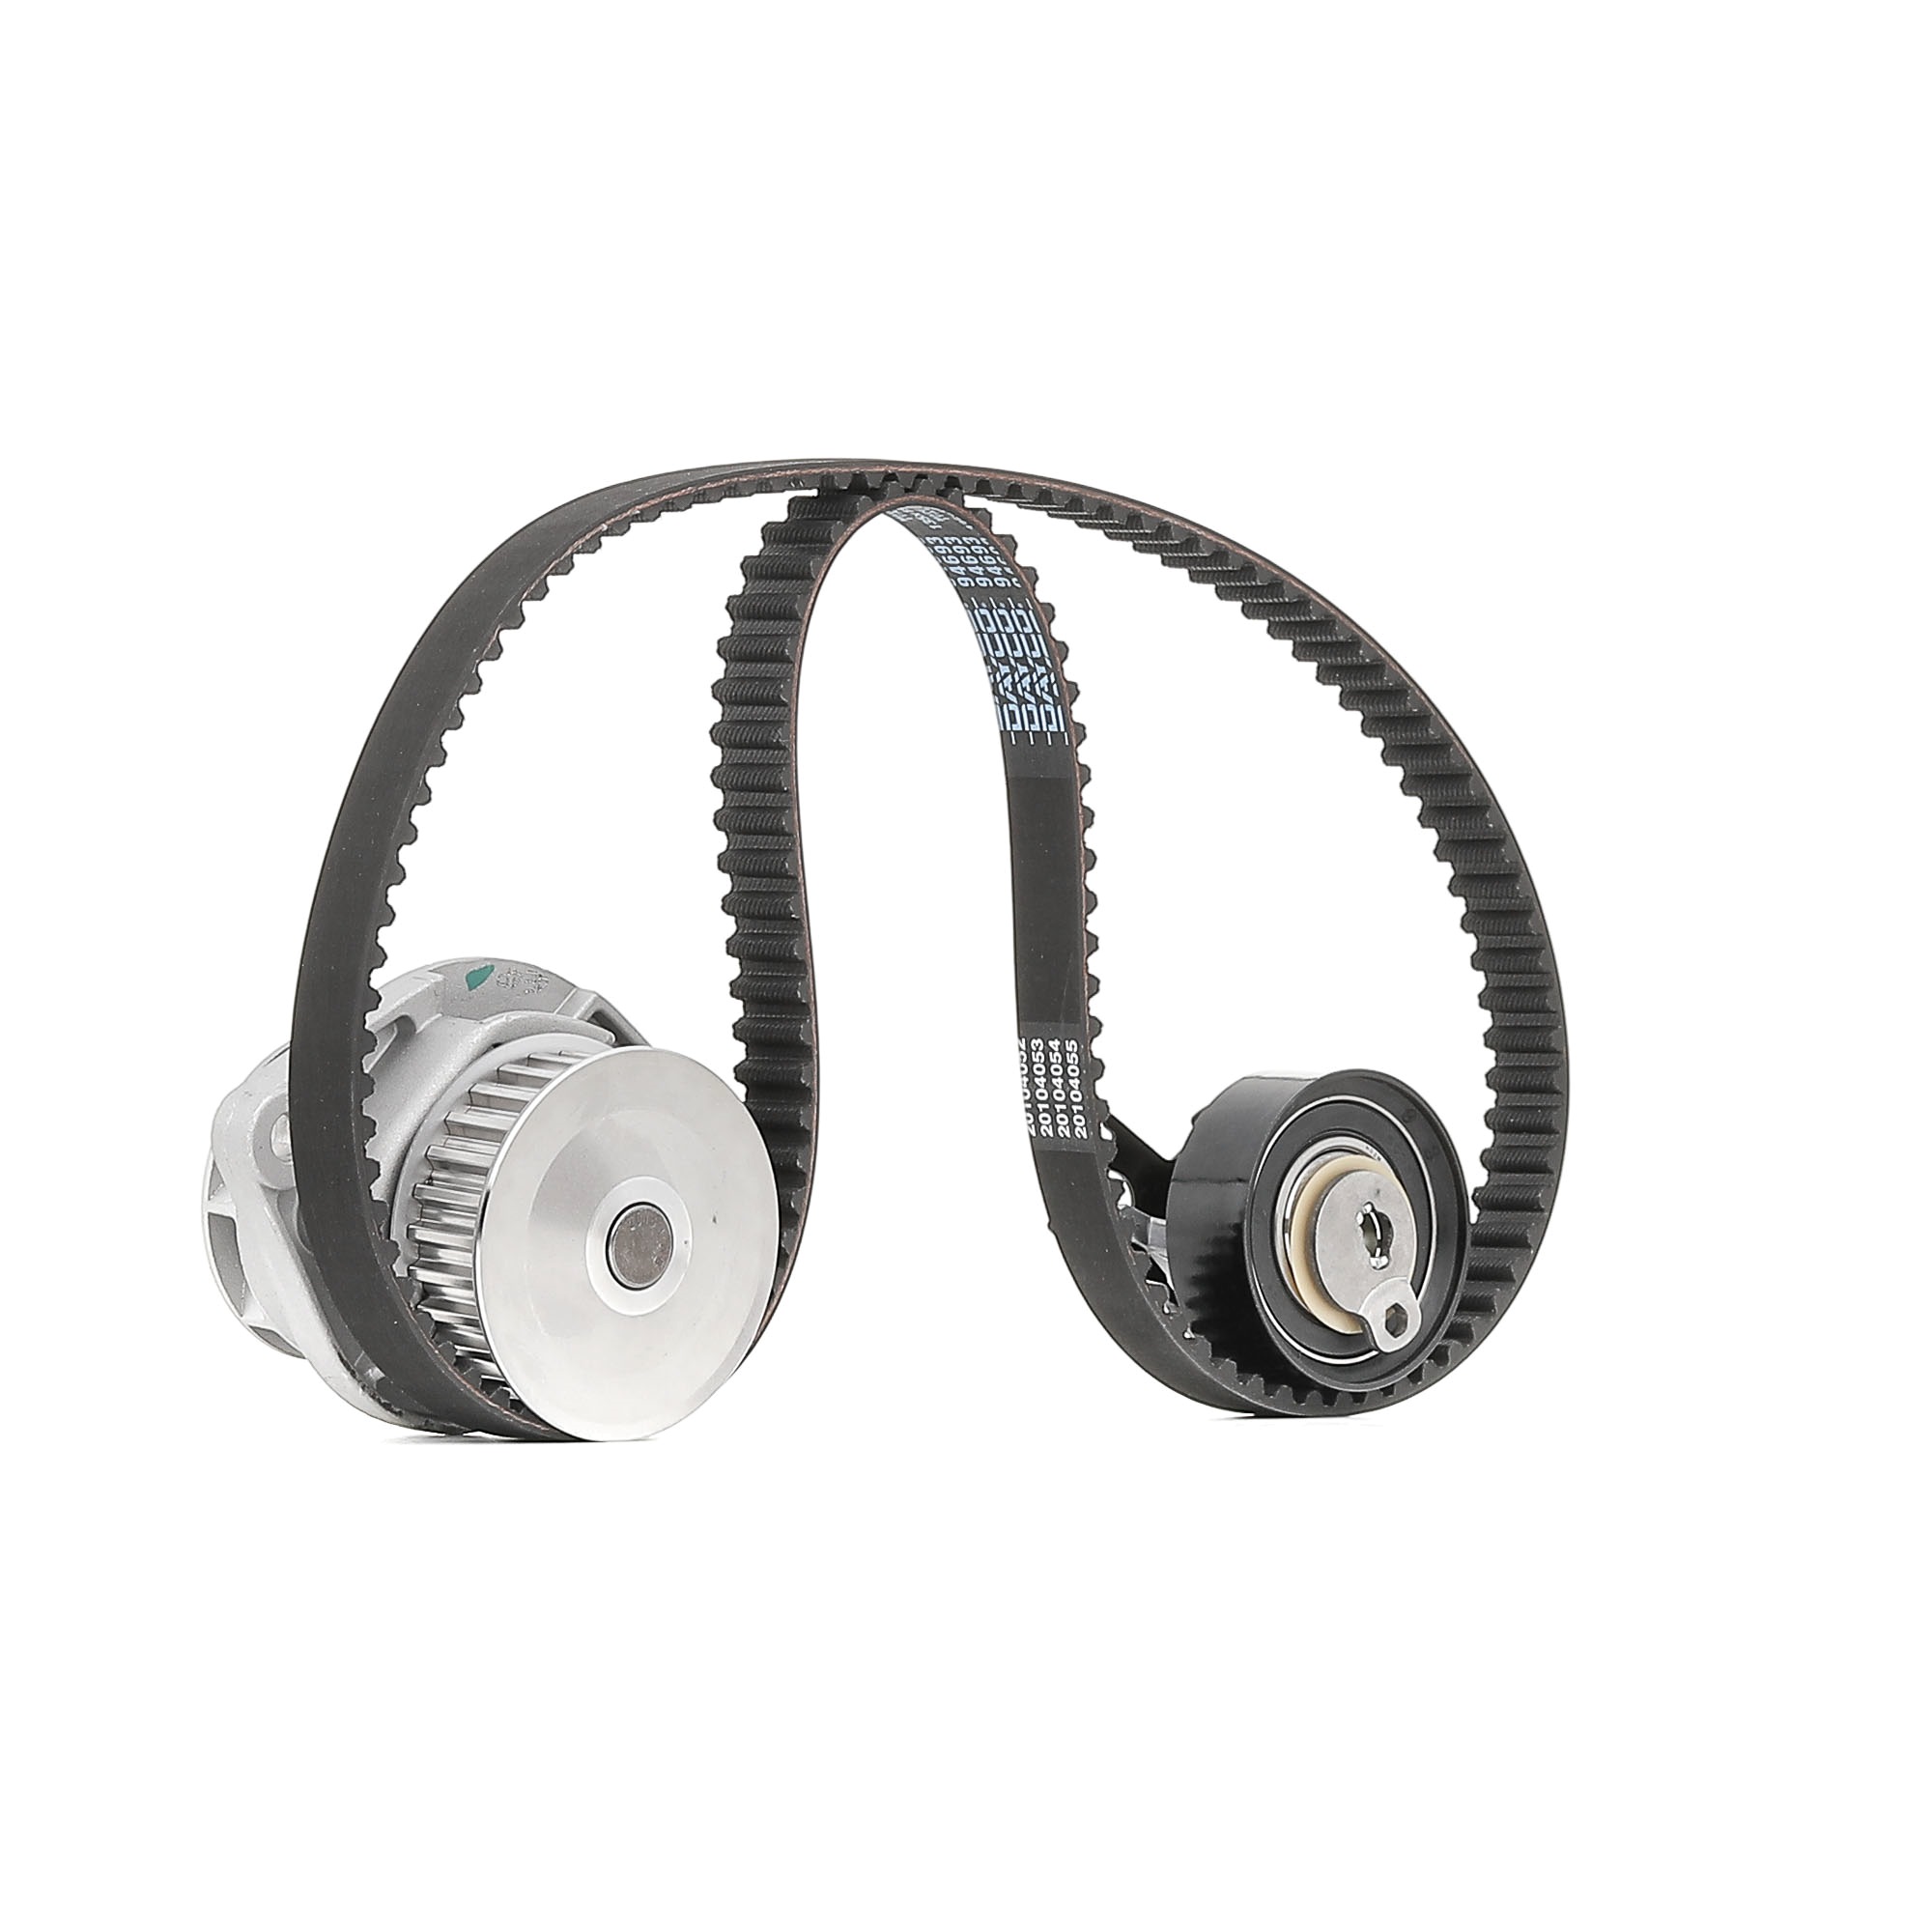 Timing belt replacement kit MAGNETI MARELLI Number of Teeth: 135 L: 1080 mm, Width: 19 mm - 132011160042